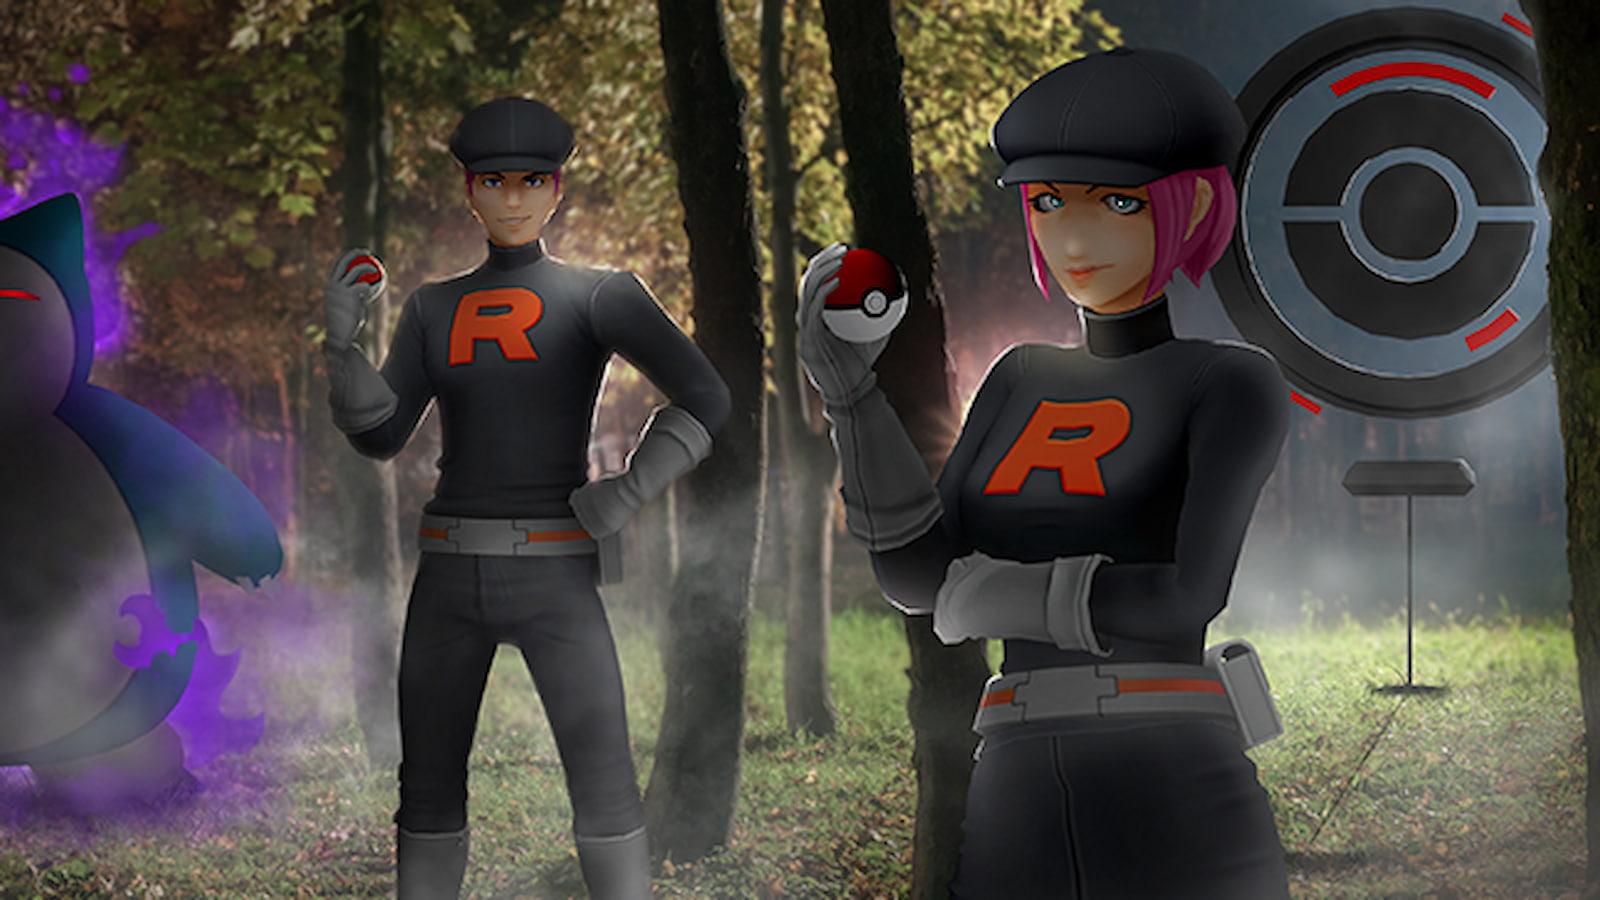 At least Team Rocket is safe from Pokemon Go's new character models